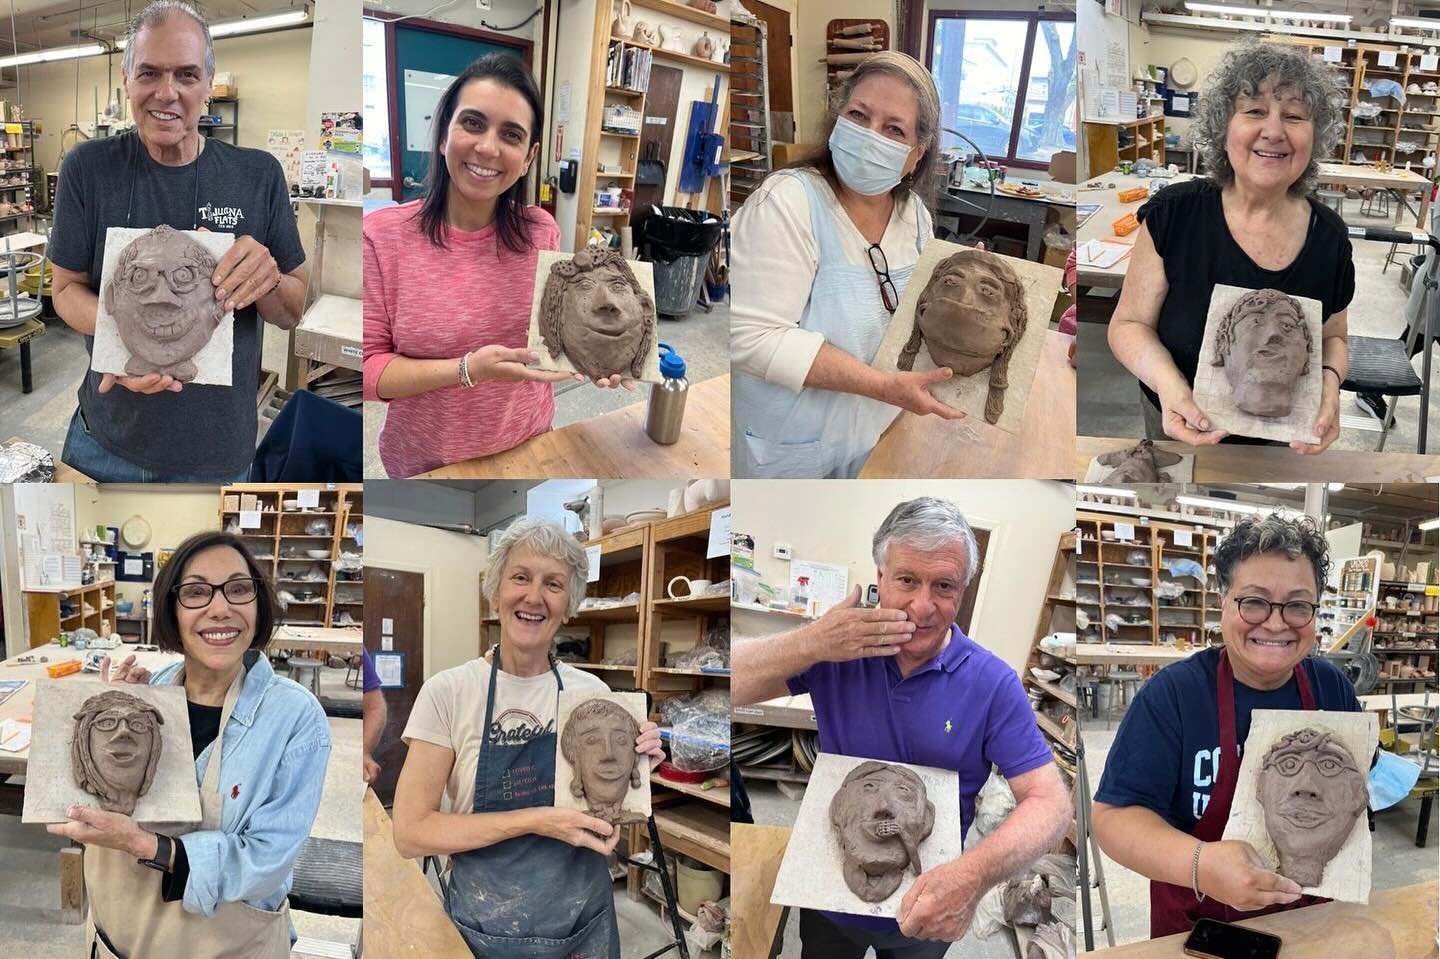 Keep up with weekly community news and other events from Clay Art Center through our newsletter, or Clay Dish Blog, updated on Mondays. This week&rsquo;s blogpost includes the story below. 

Clay Art Center is proud to partner with Cancer Support Com